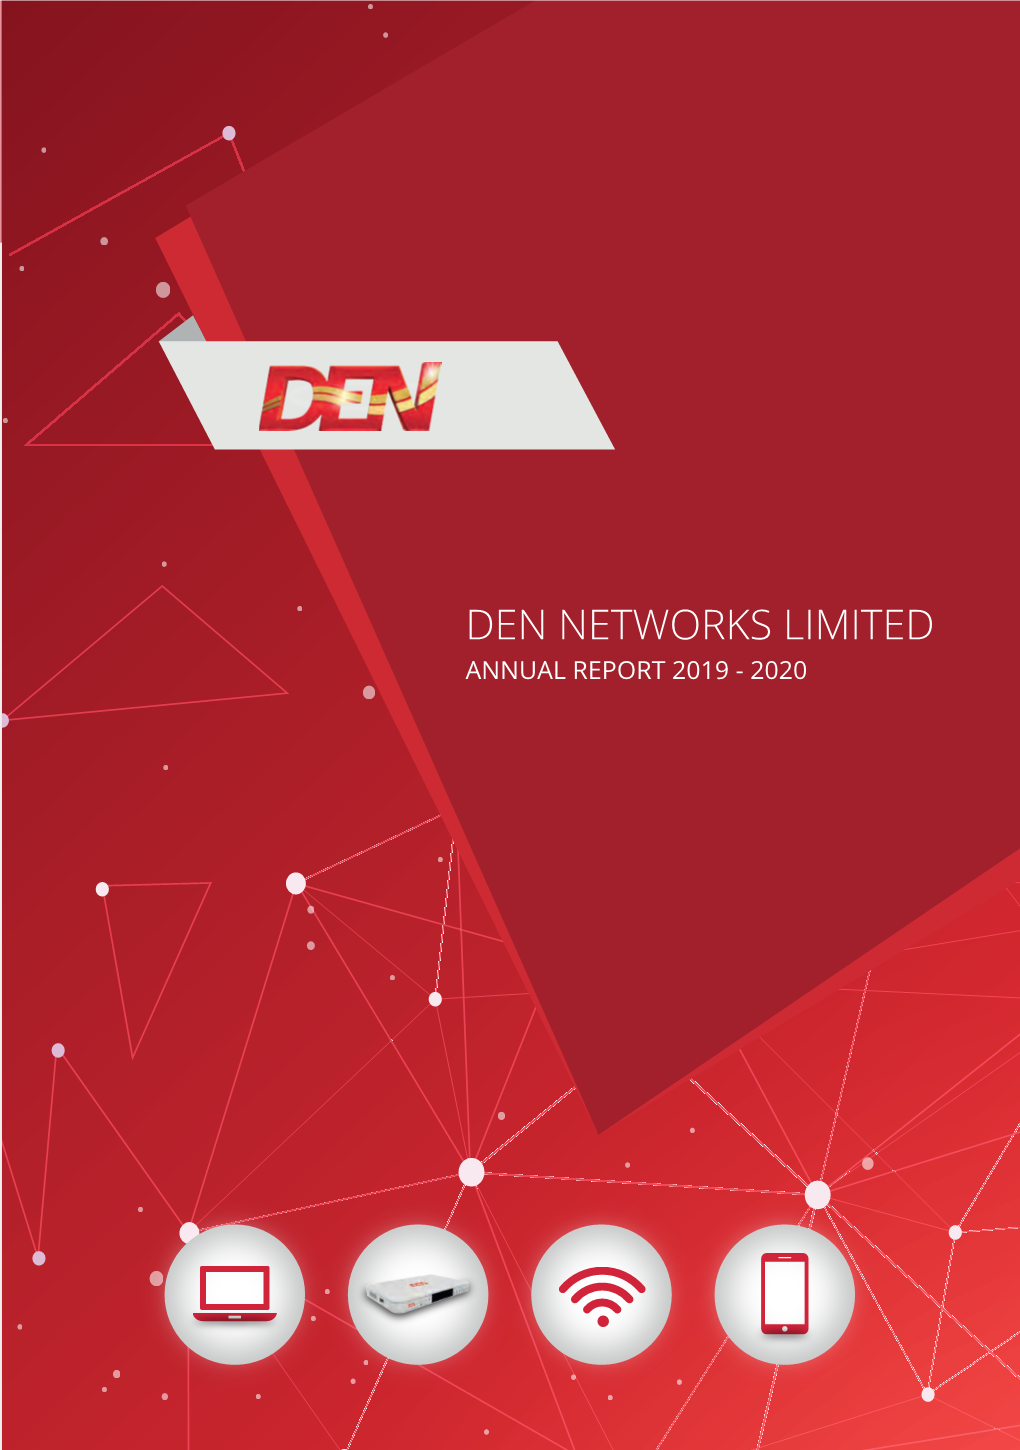 Den Networks Limited Annual Report 2019 - 2020